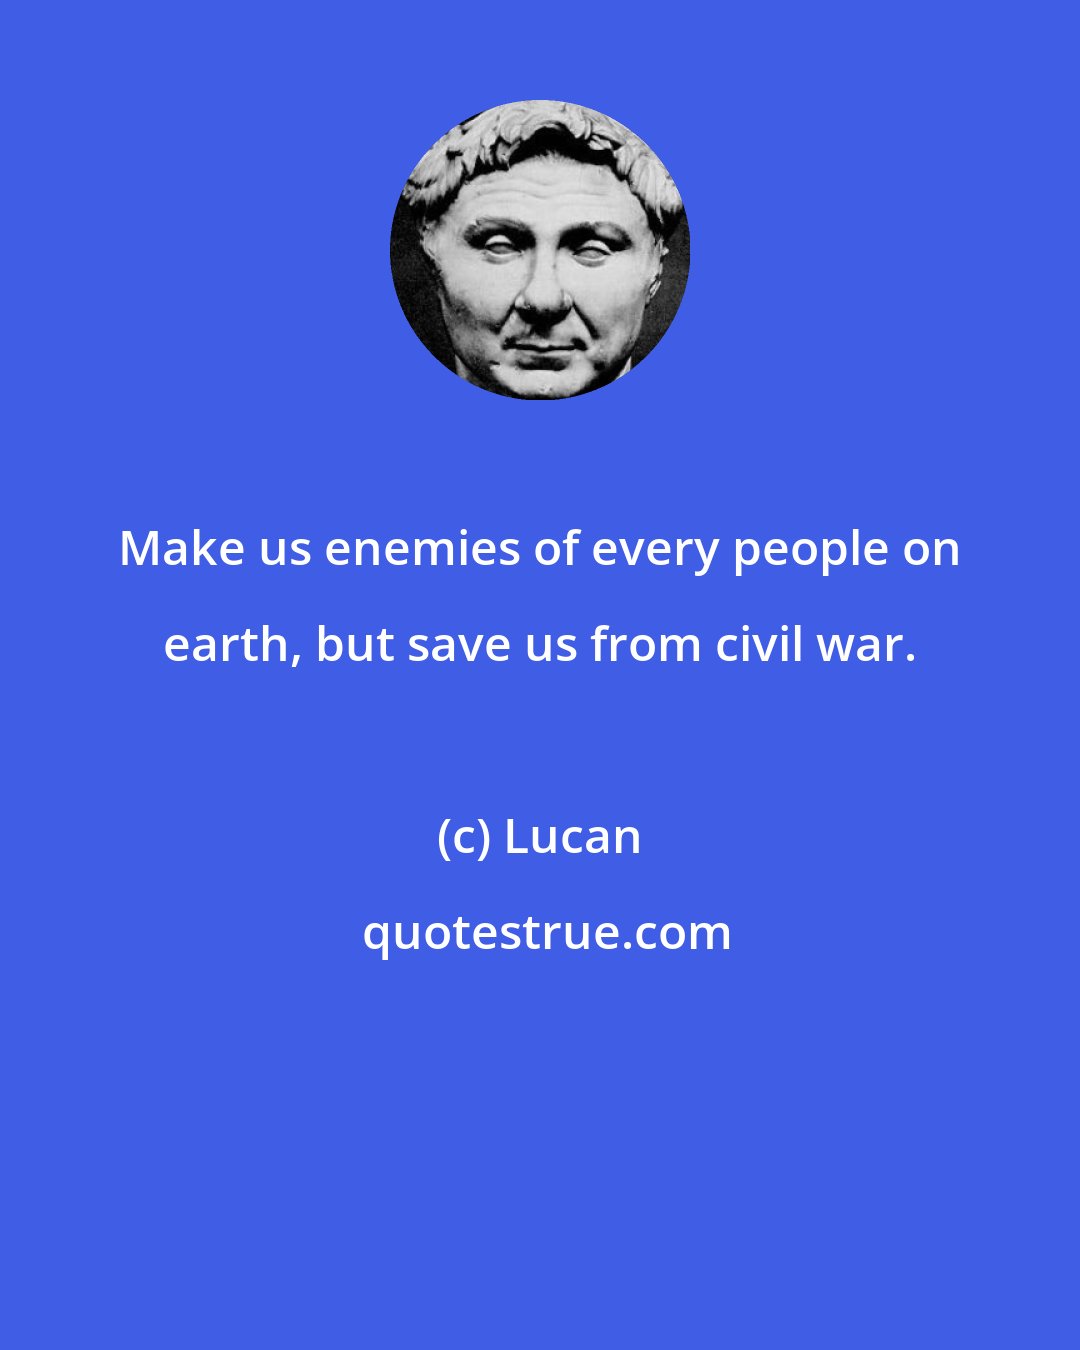 Lucan: Make us enemies of every people on earth, but save us from civil war.